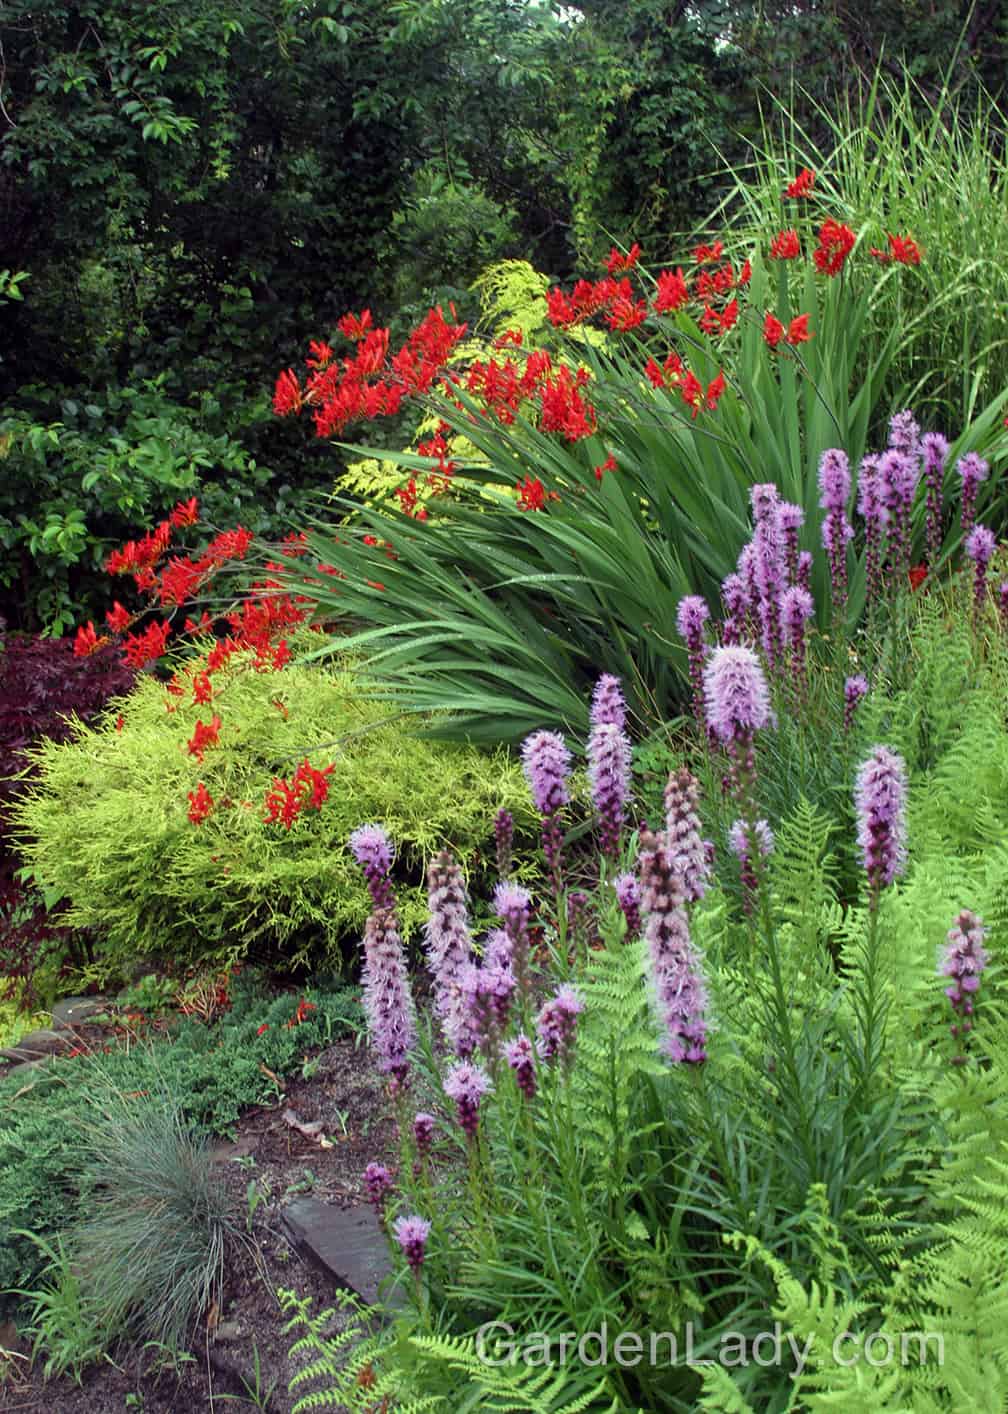 The bright red 'Lucifer' flowers are a natural with yellows and purples. In this planting the Liatris is in flower at the same time, making a winning garden combo.